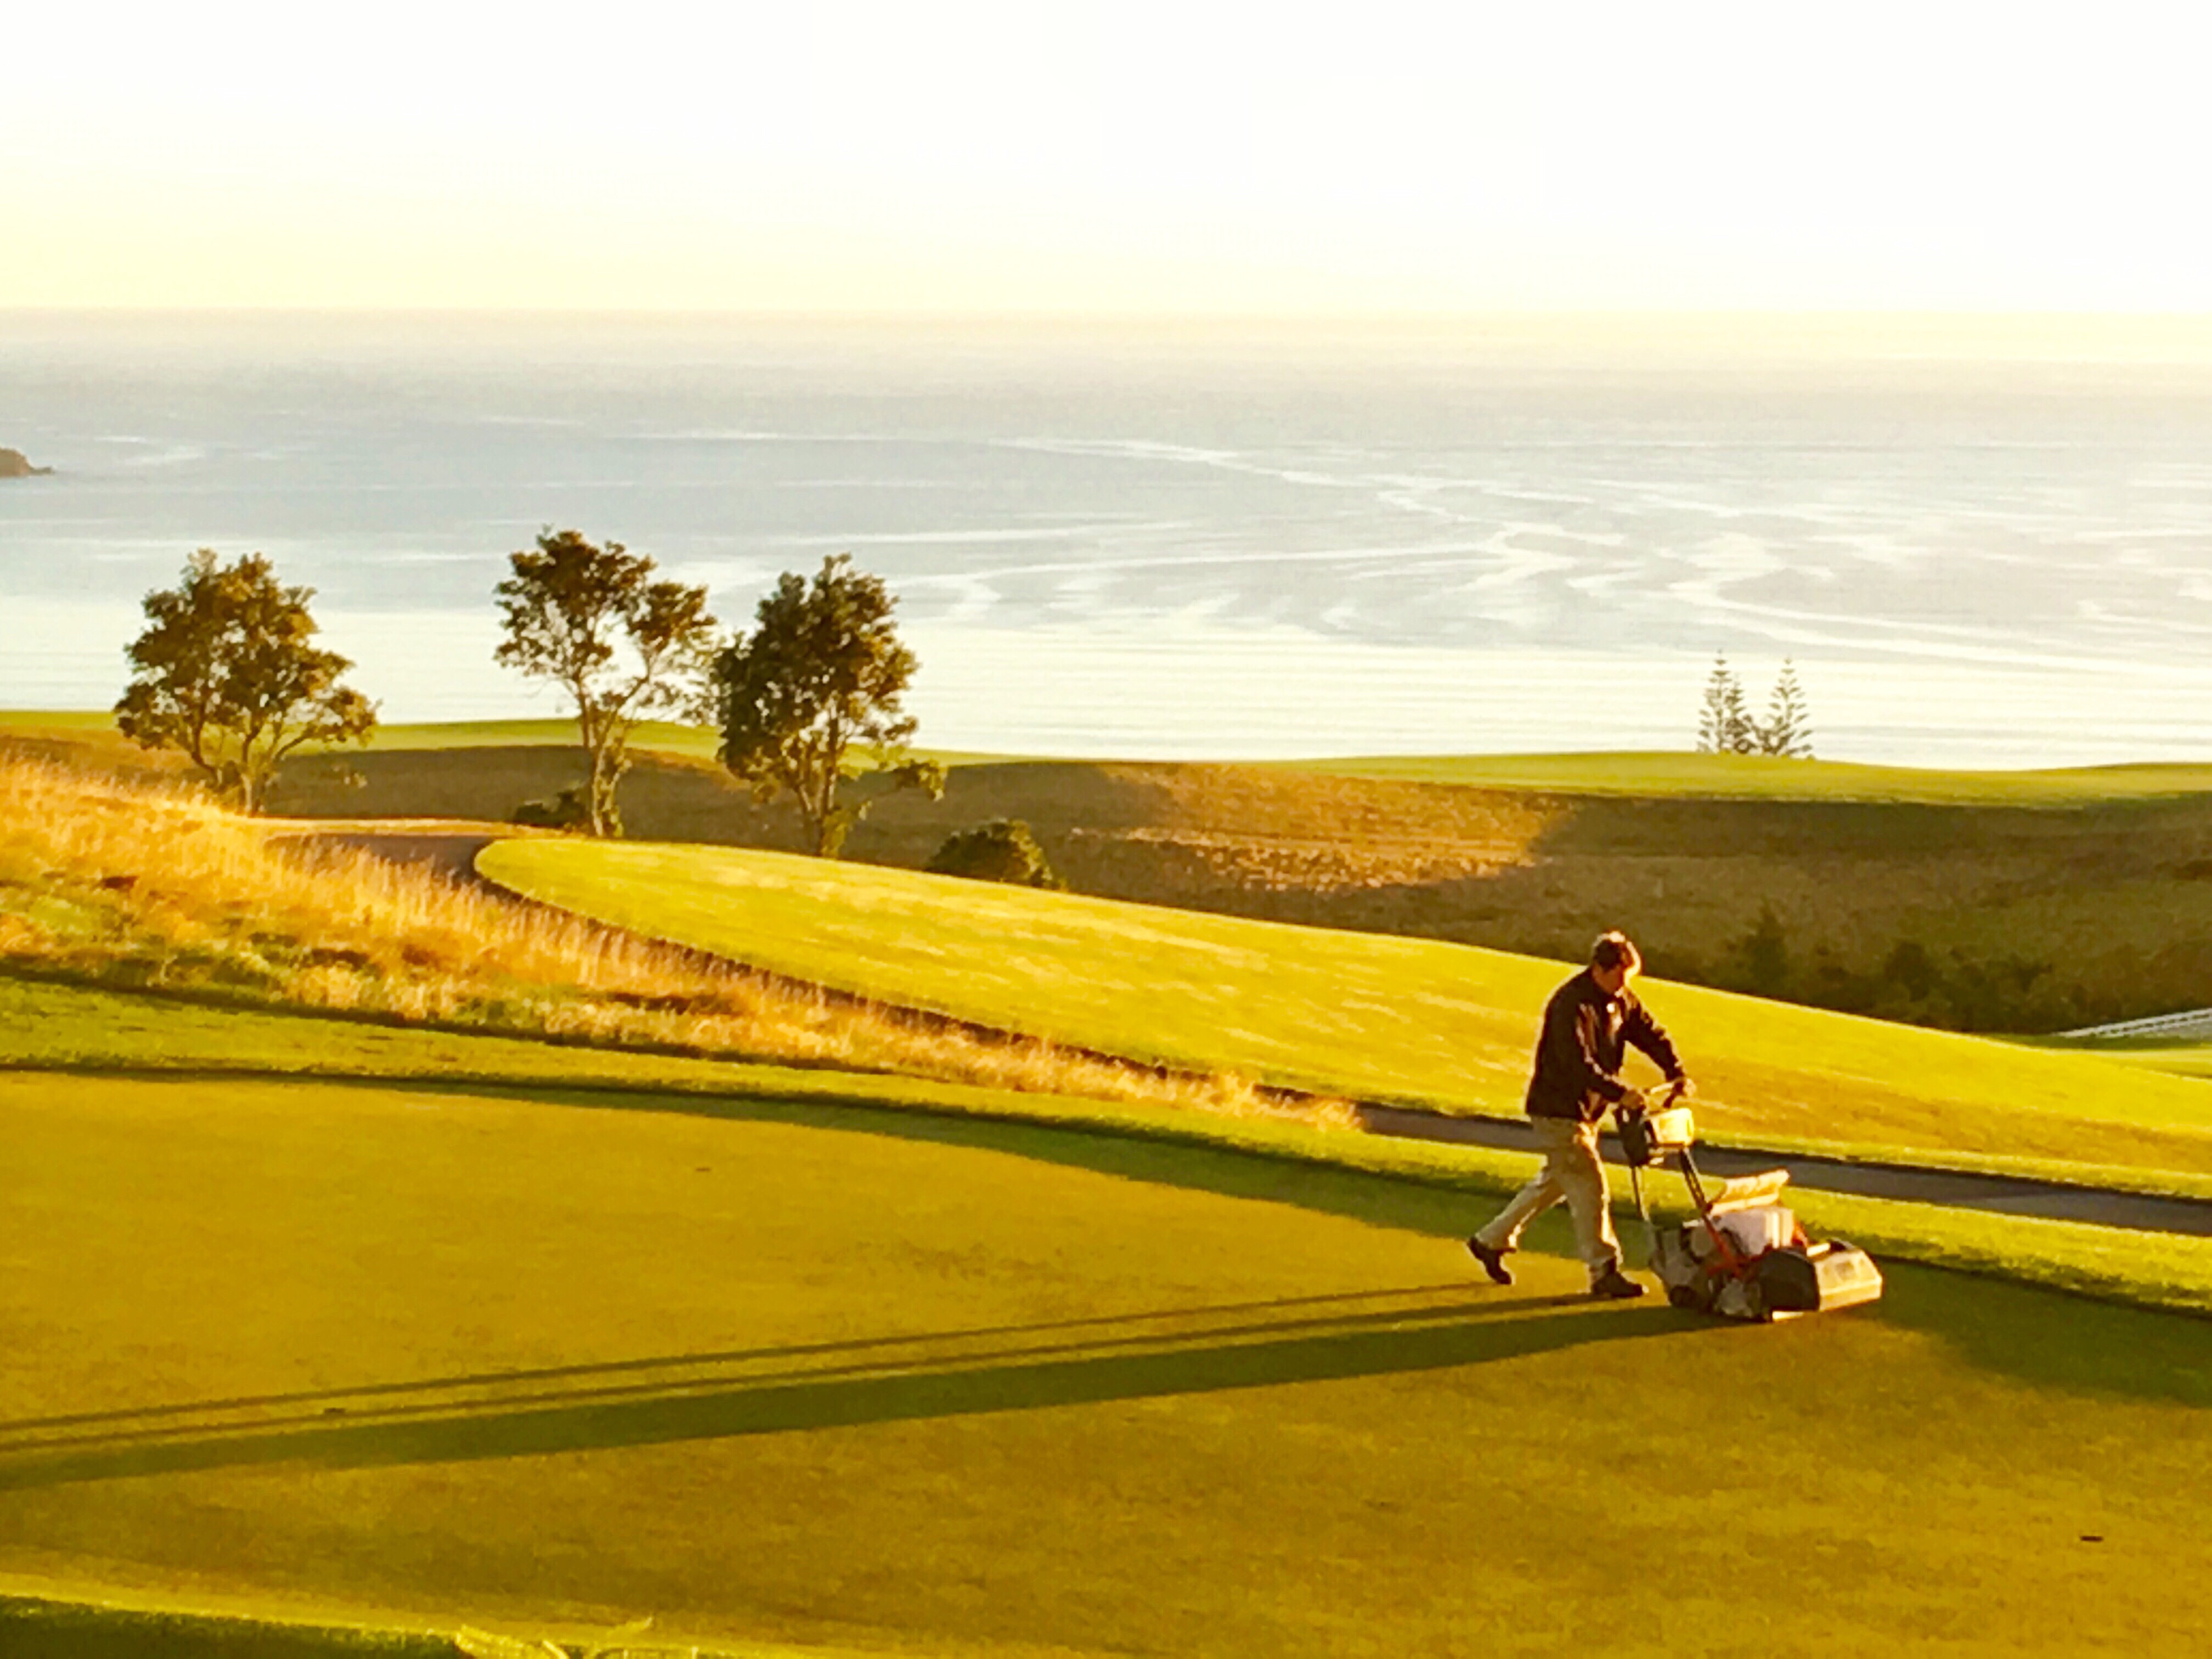 The R&A offers agronomy service in Asia-Pacific as part of its commitment to delivering a sustainable future for golf